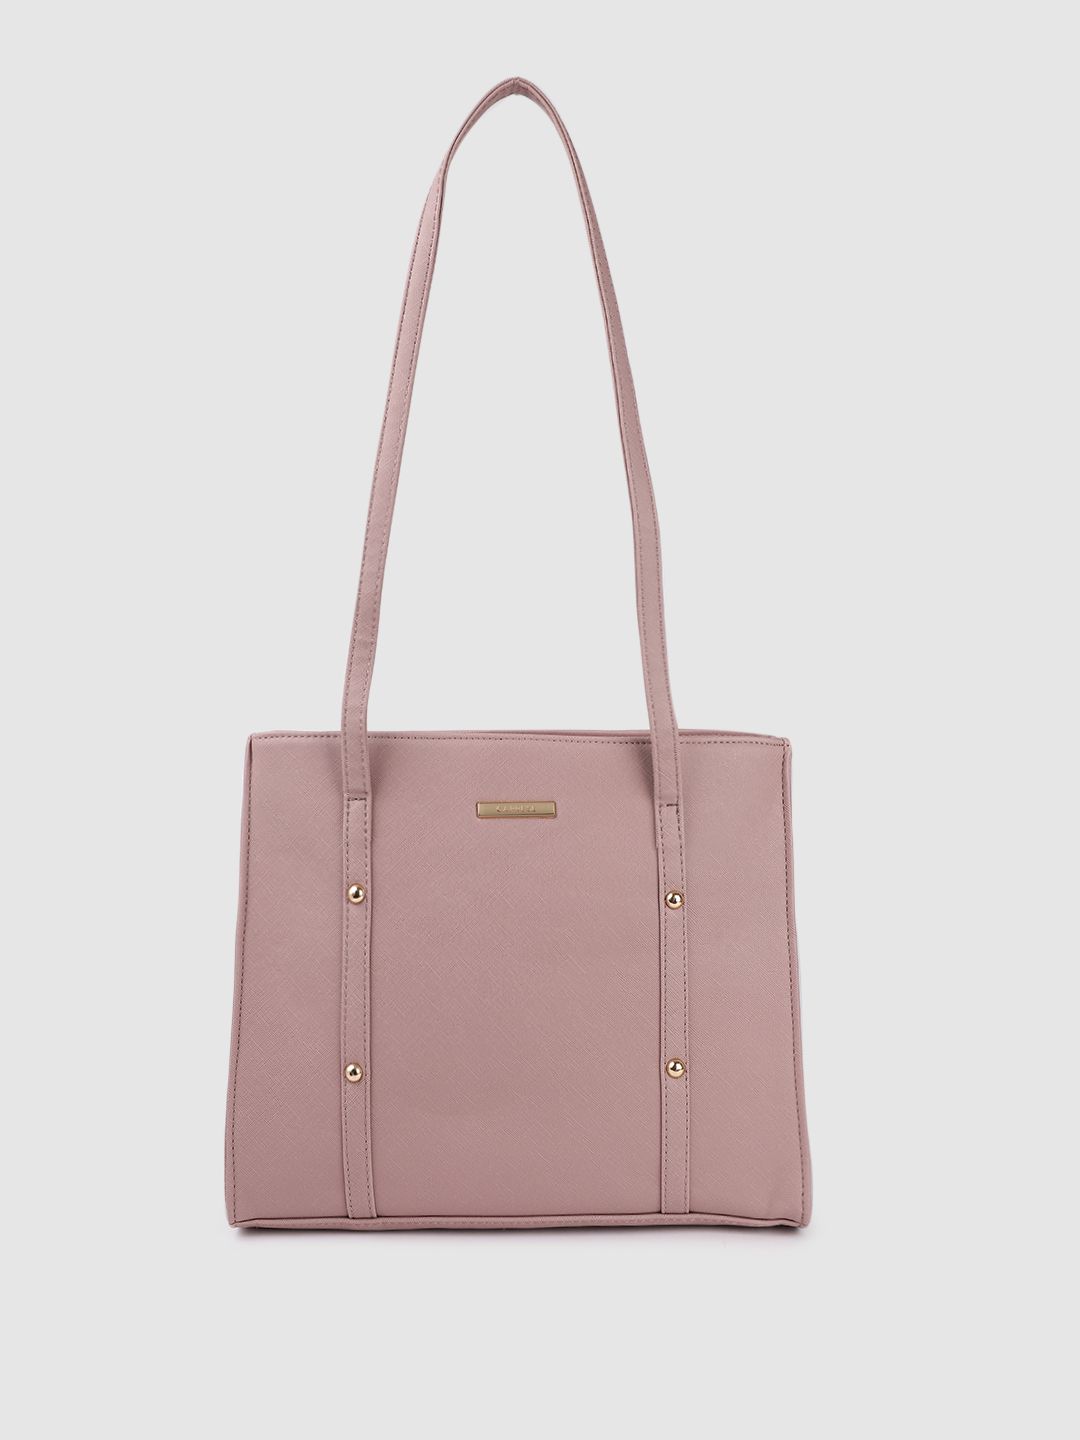 Caprese Rose Leather Structured Shoulder Bag Price in India